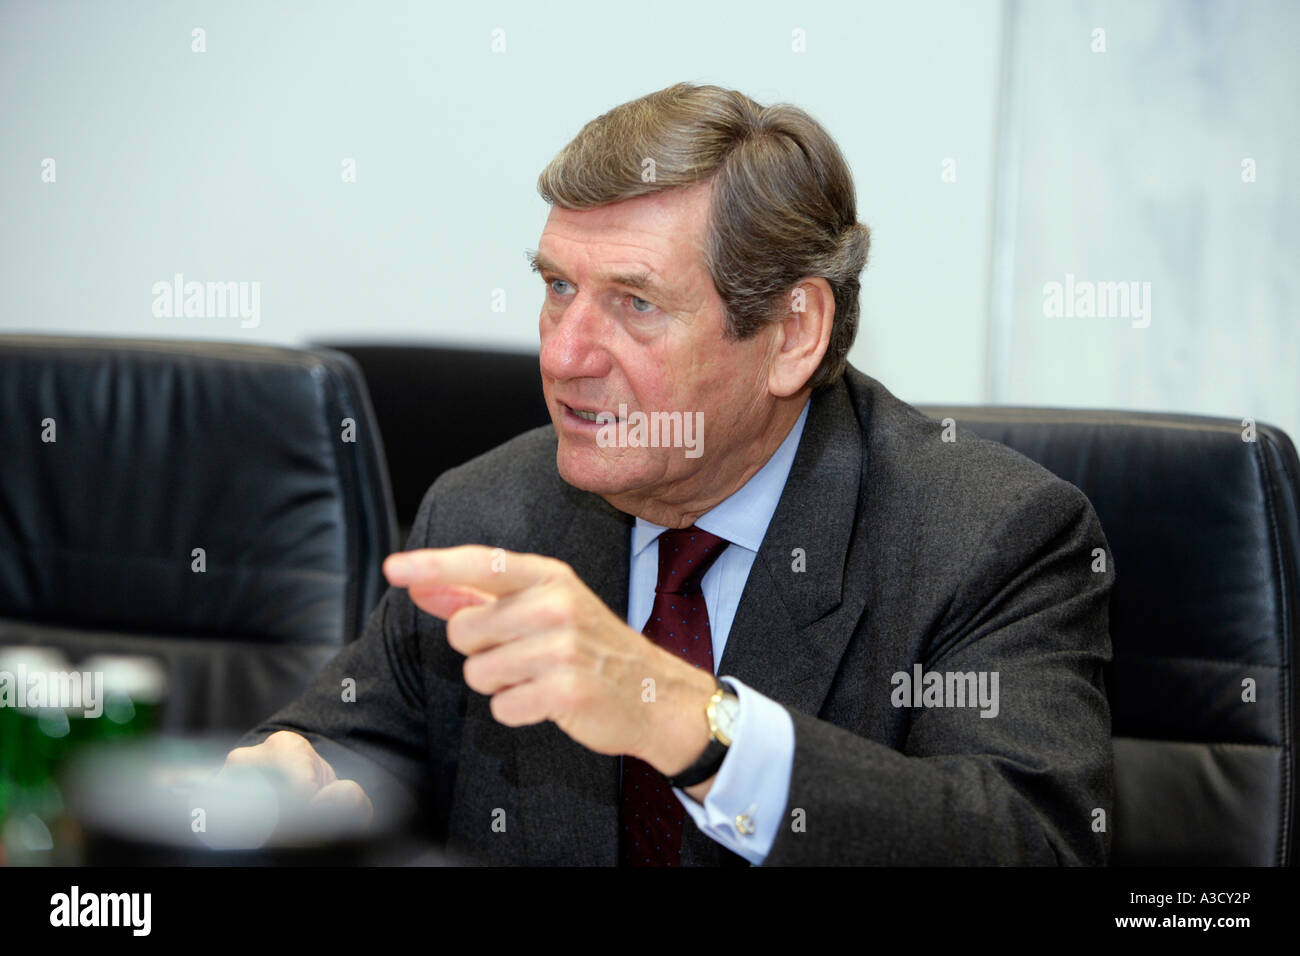 Dr Ekkehard Schulz chief executive officer of Thyssen AG during an interview Stock Photo